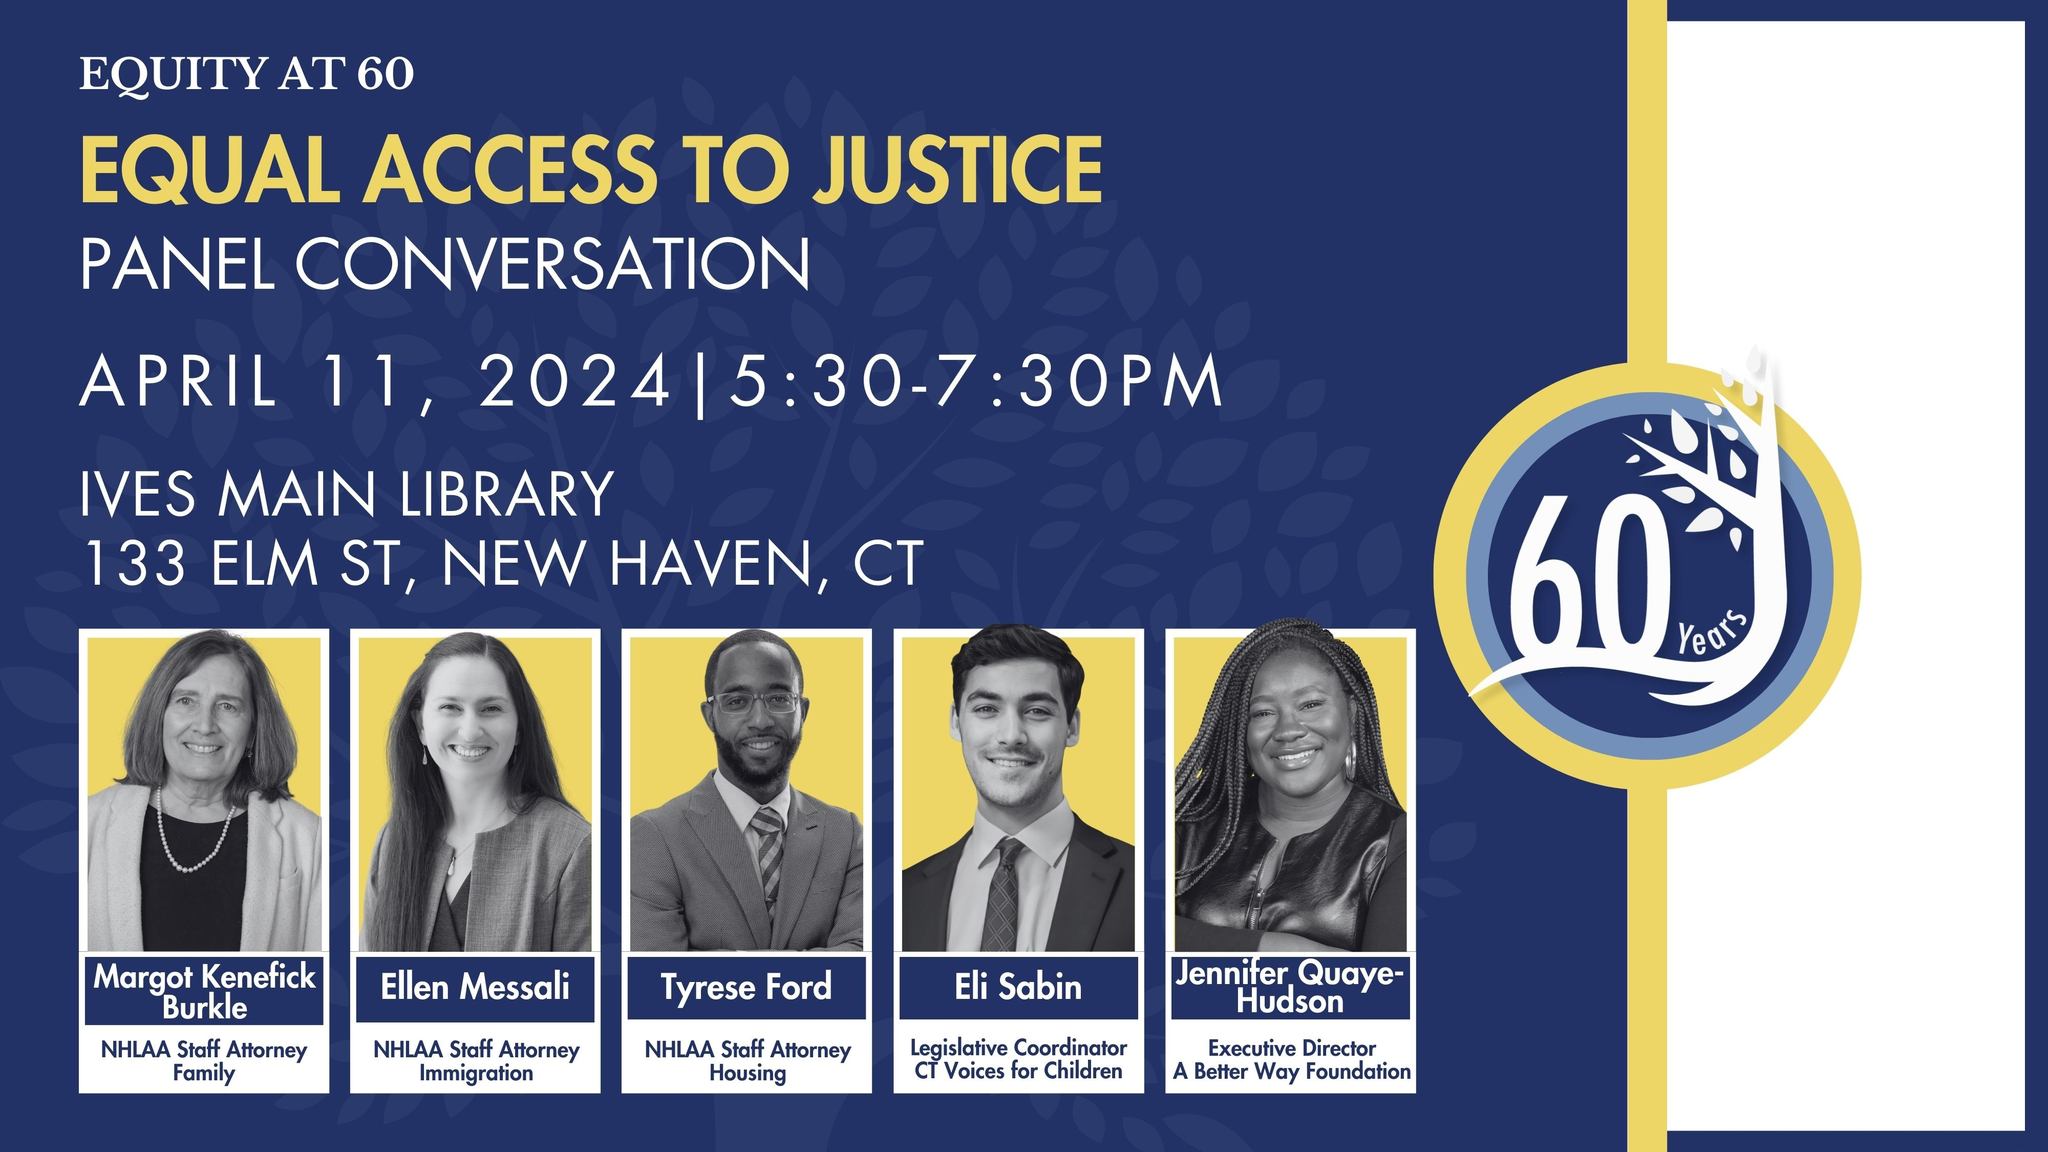 Equal Access to Justice | Panel Conversation